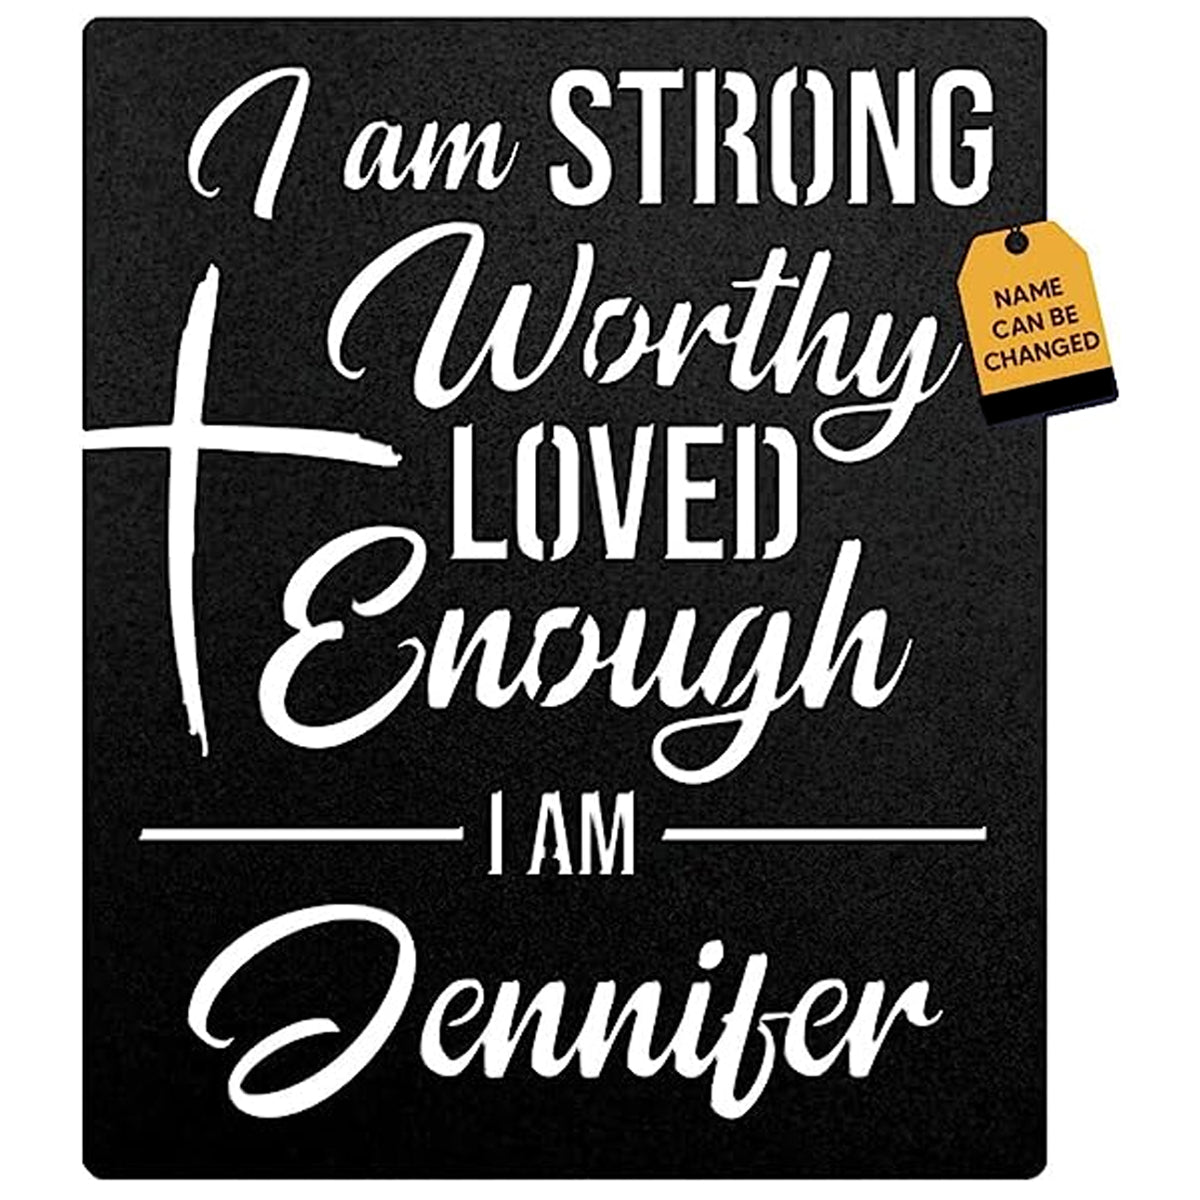 Christianartbag Metal Signs, I Am Strong, Personalized Metal, Christian Wall Art With Religious Scripture, Appreciation Gifts For Family - Christian Art Bag